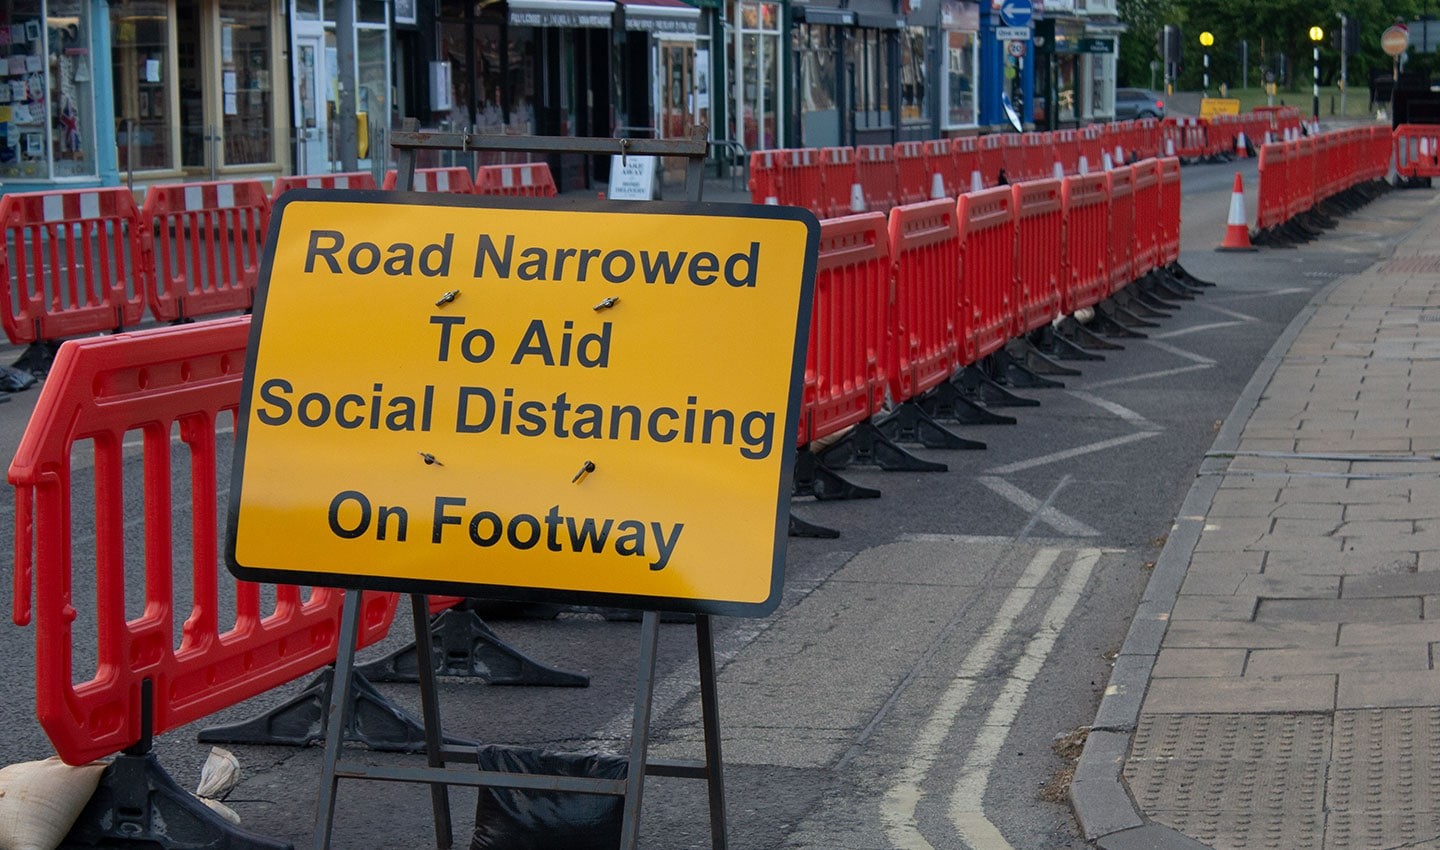 A sign in the UK informs citizens that a road is half closed to allow enough social distancing space for pedestrians.